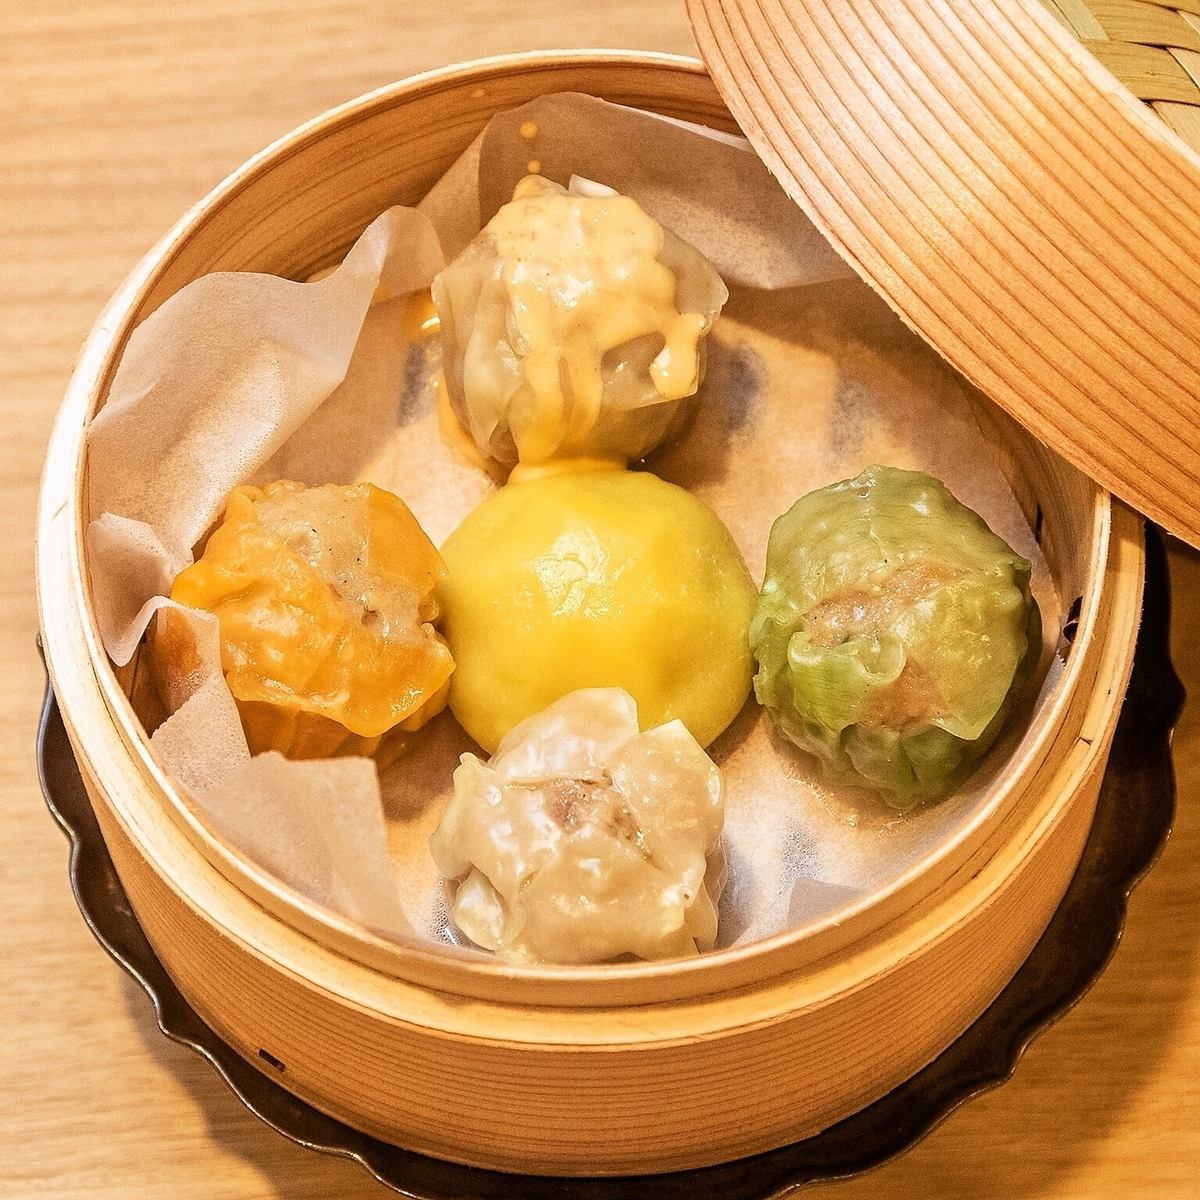 There are many recommended menus such as "stew", "shumai", and "night parfait"♪